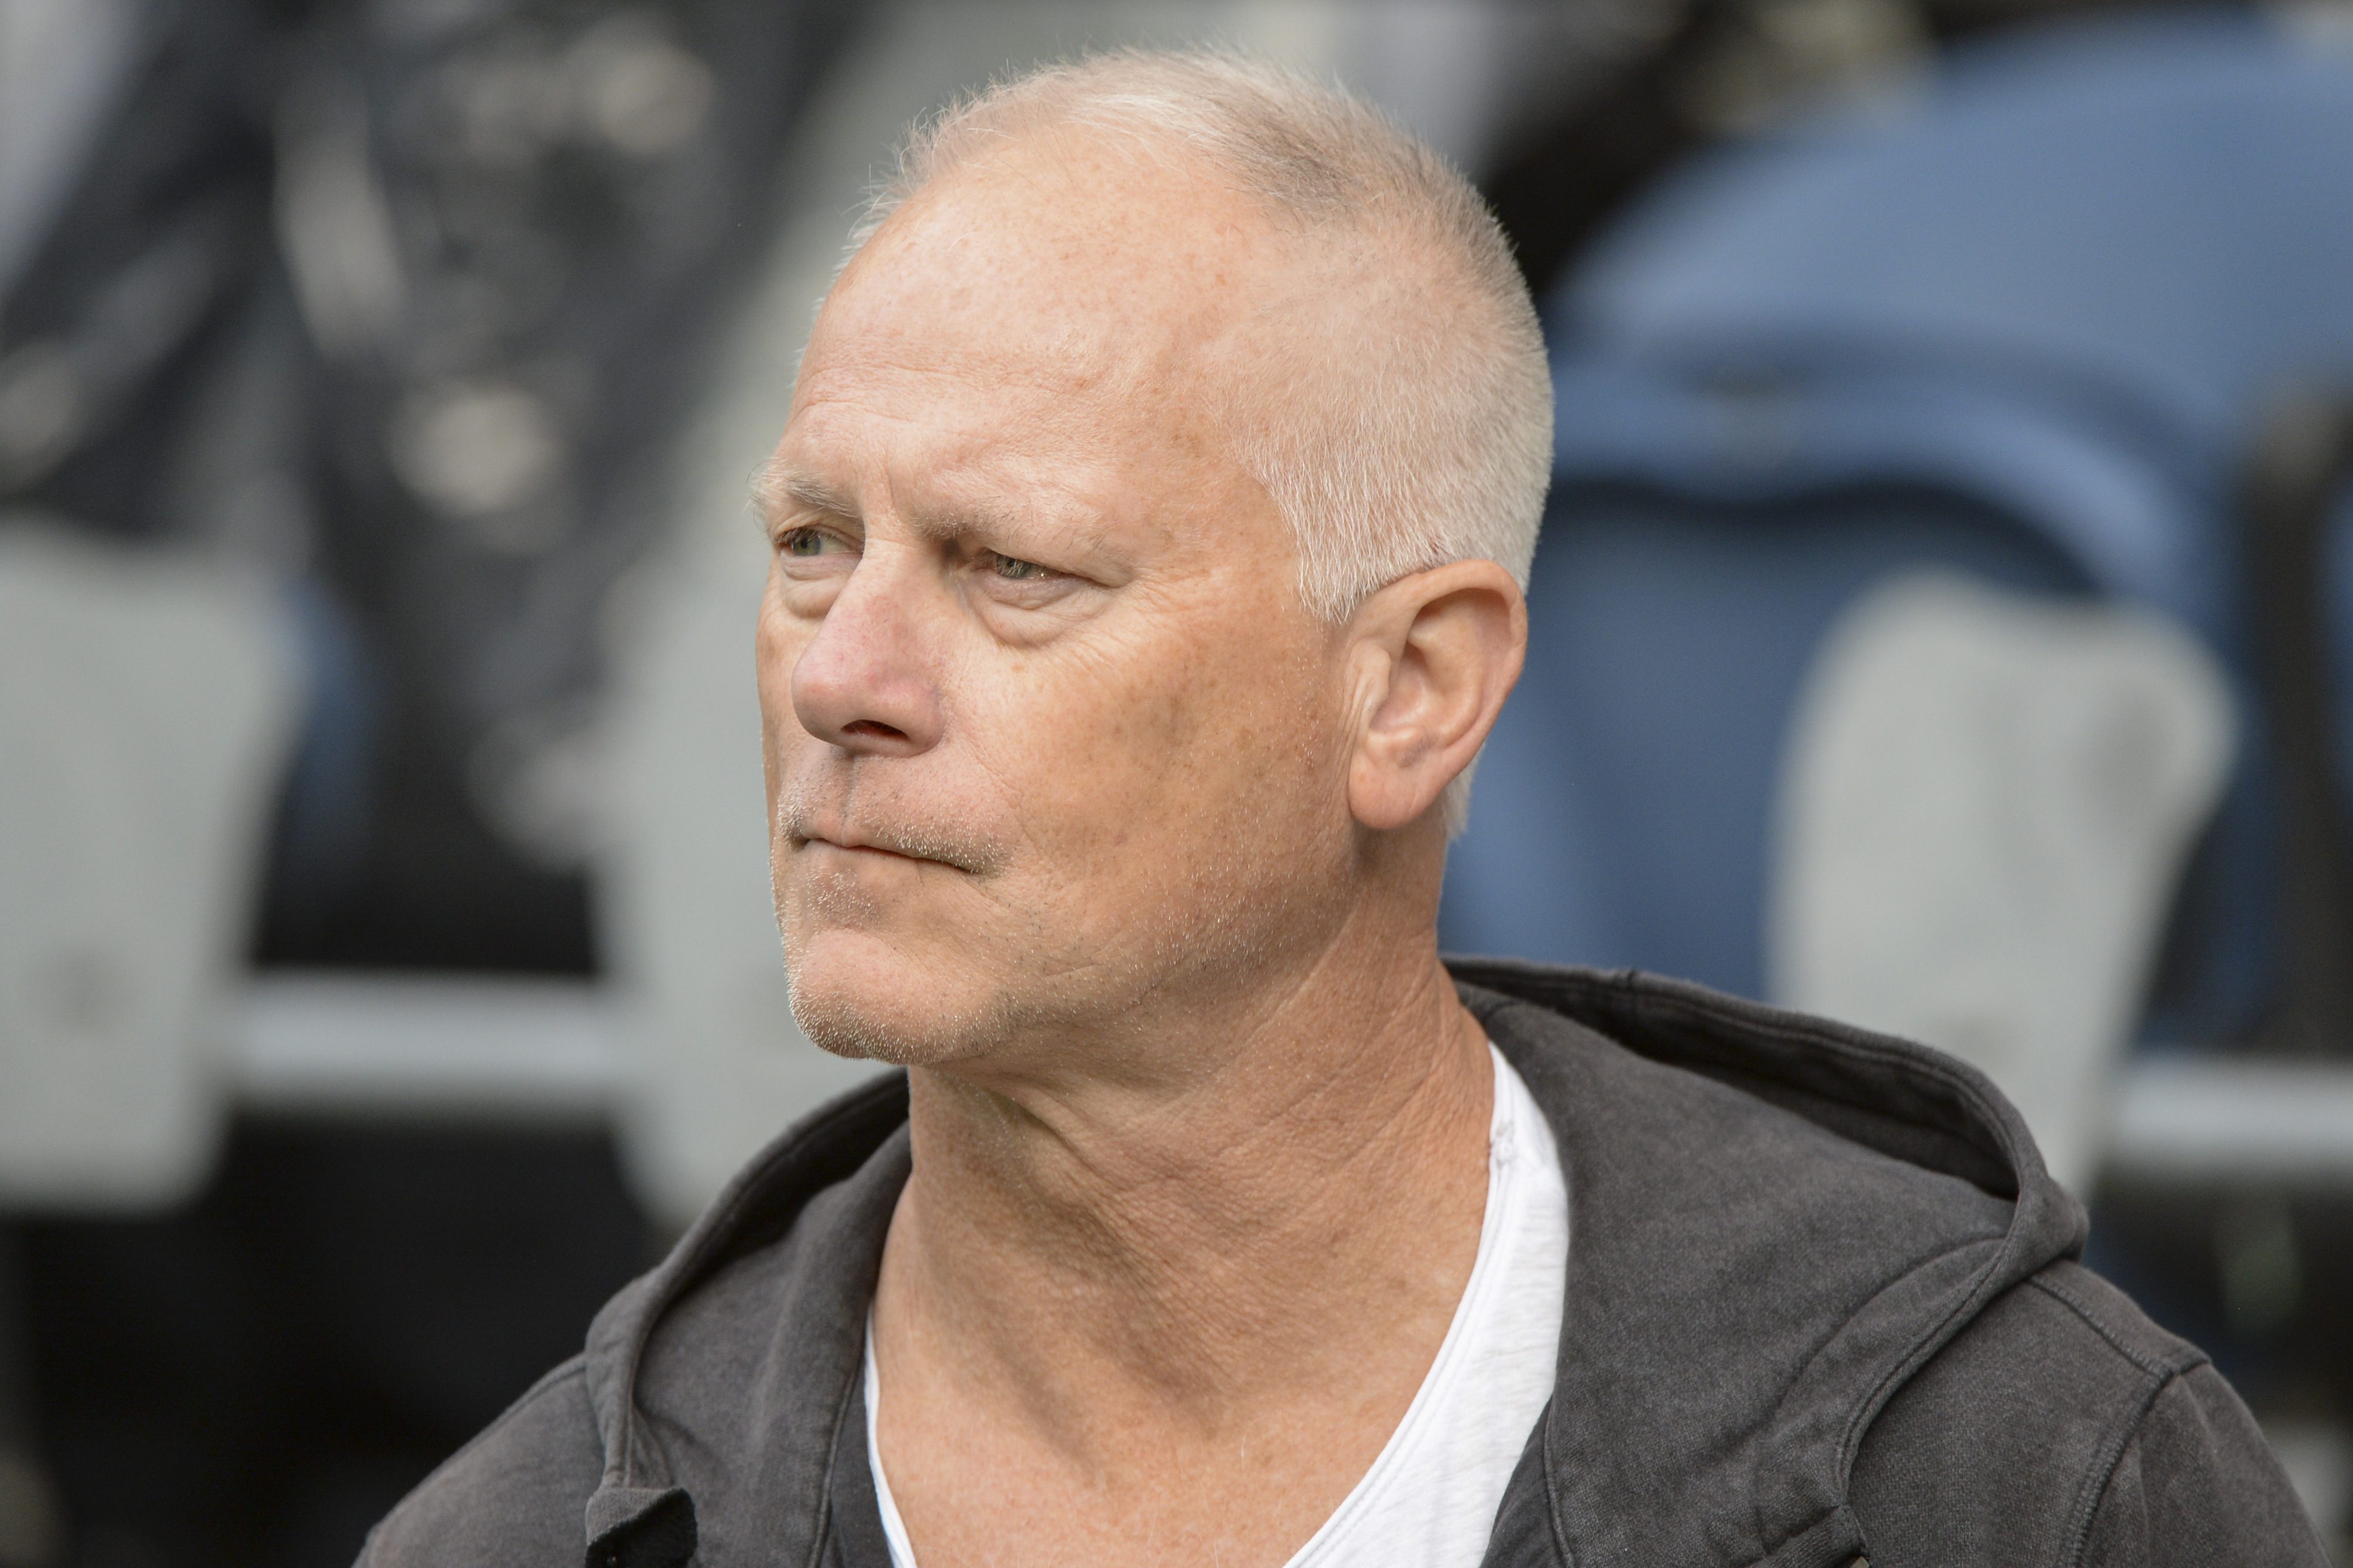 Former ESPN sportscaster Kenny Mayne at an NFL game in 2019. Mayne has just joined Caesars Sportsbook.